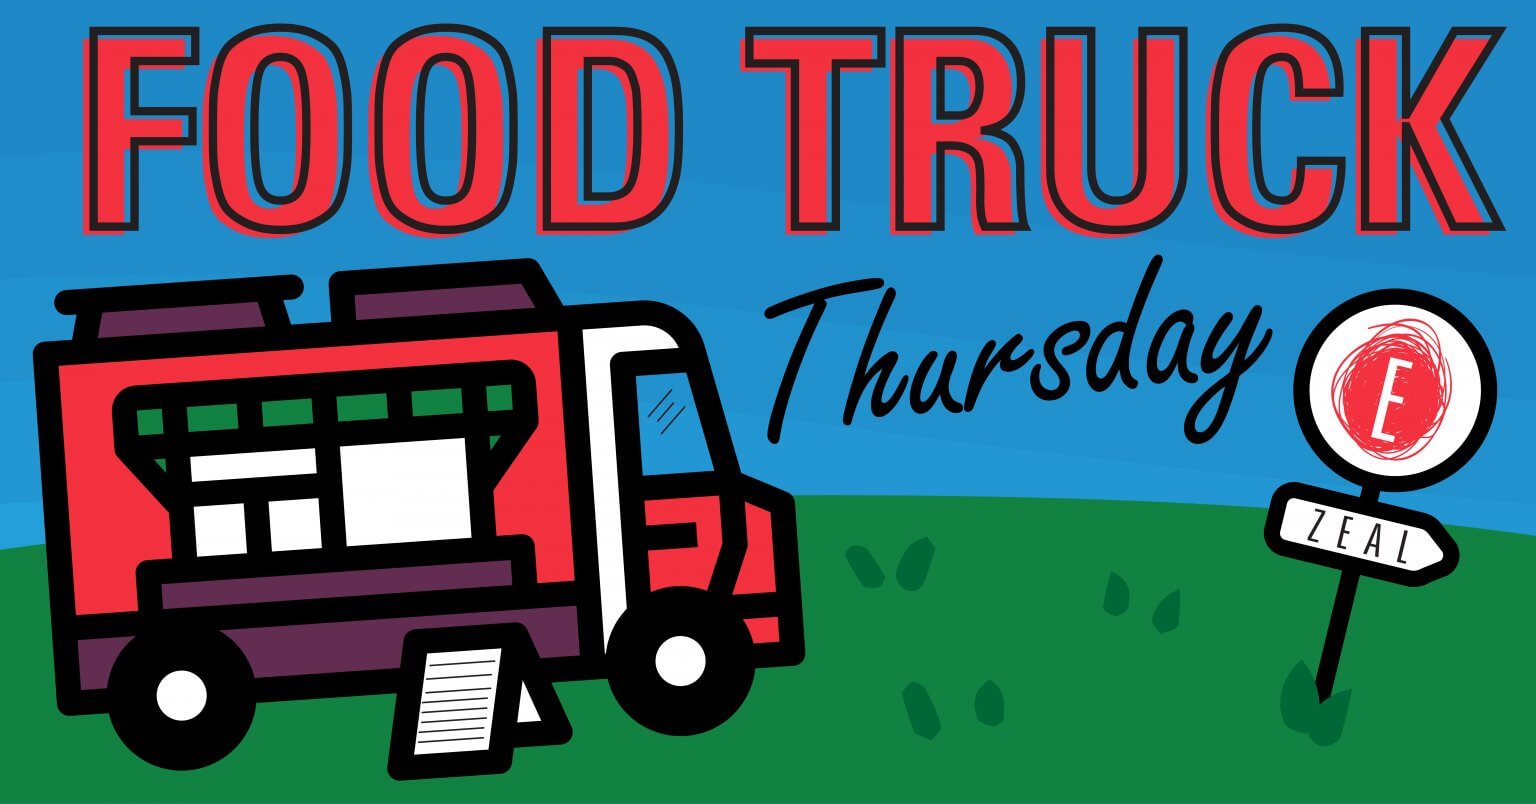 Food Truck Thursday at Zeal Startup Sioux Falls